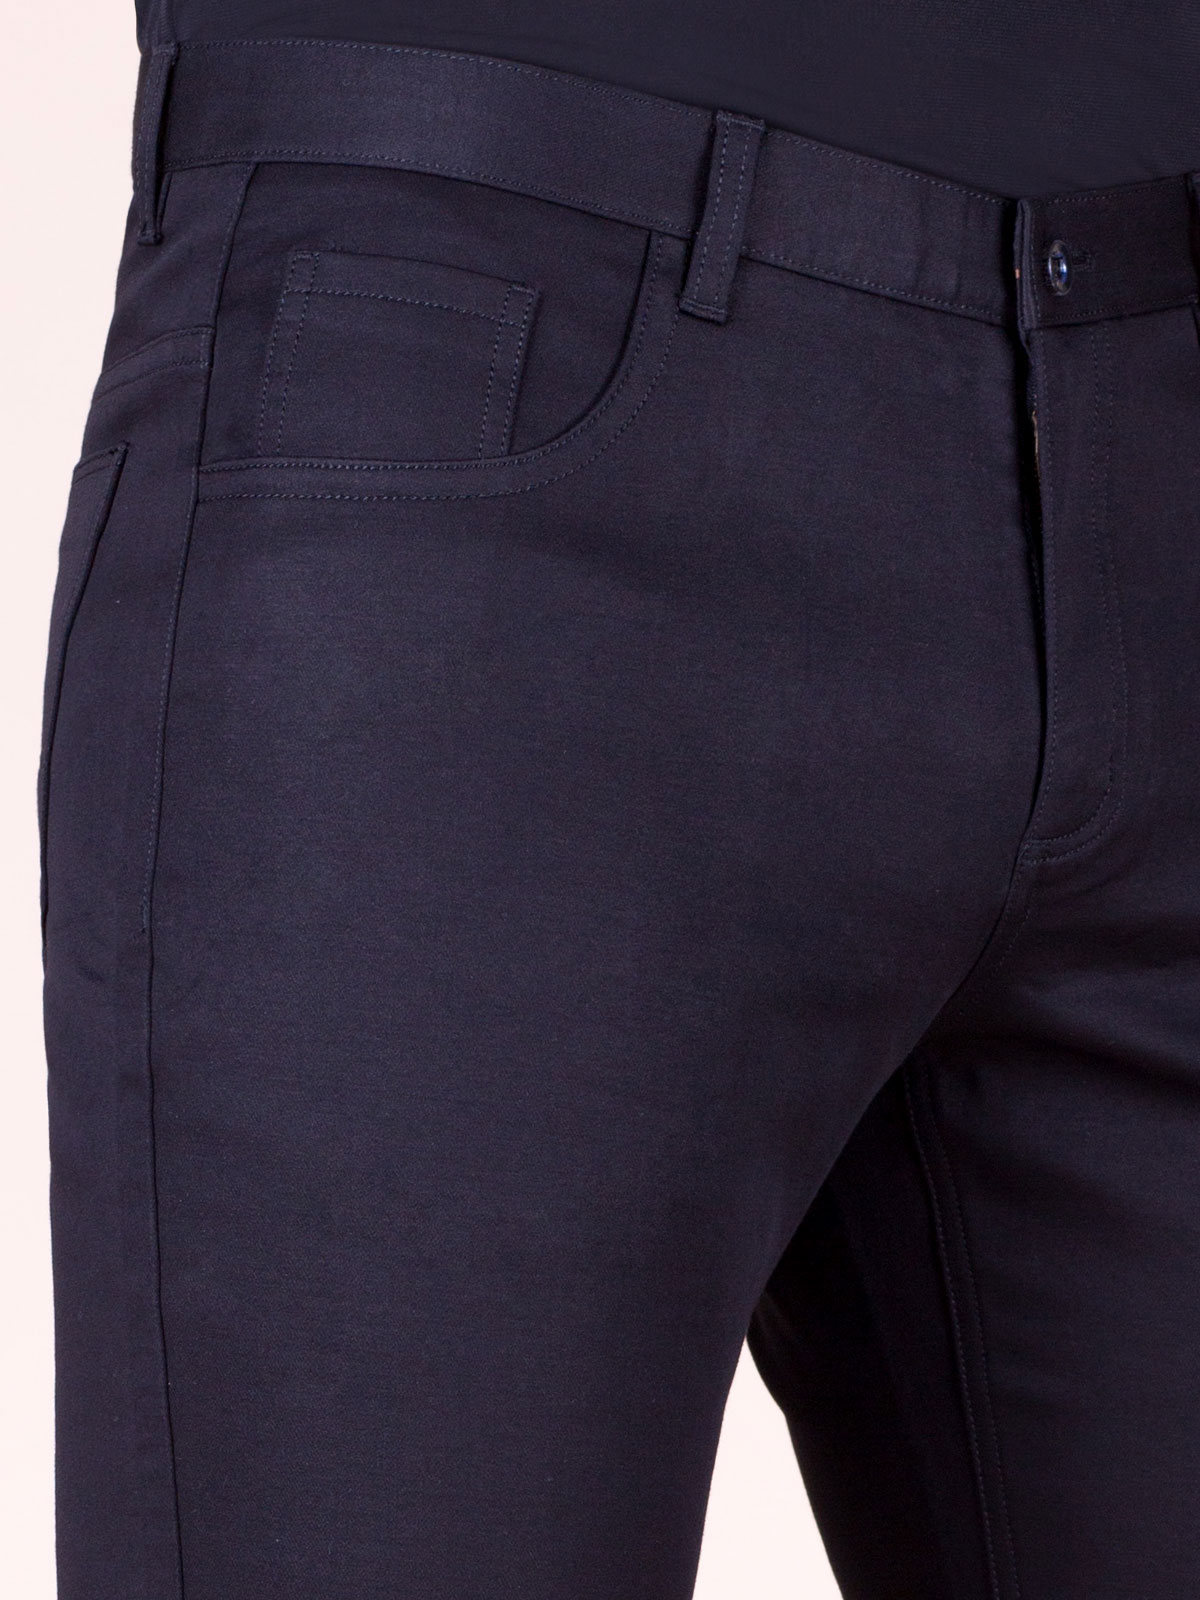 Black pants with five pockets - 60240 € 18.56 img3